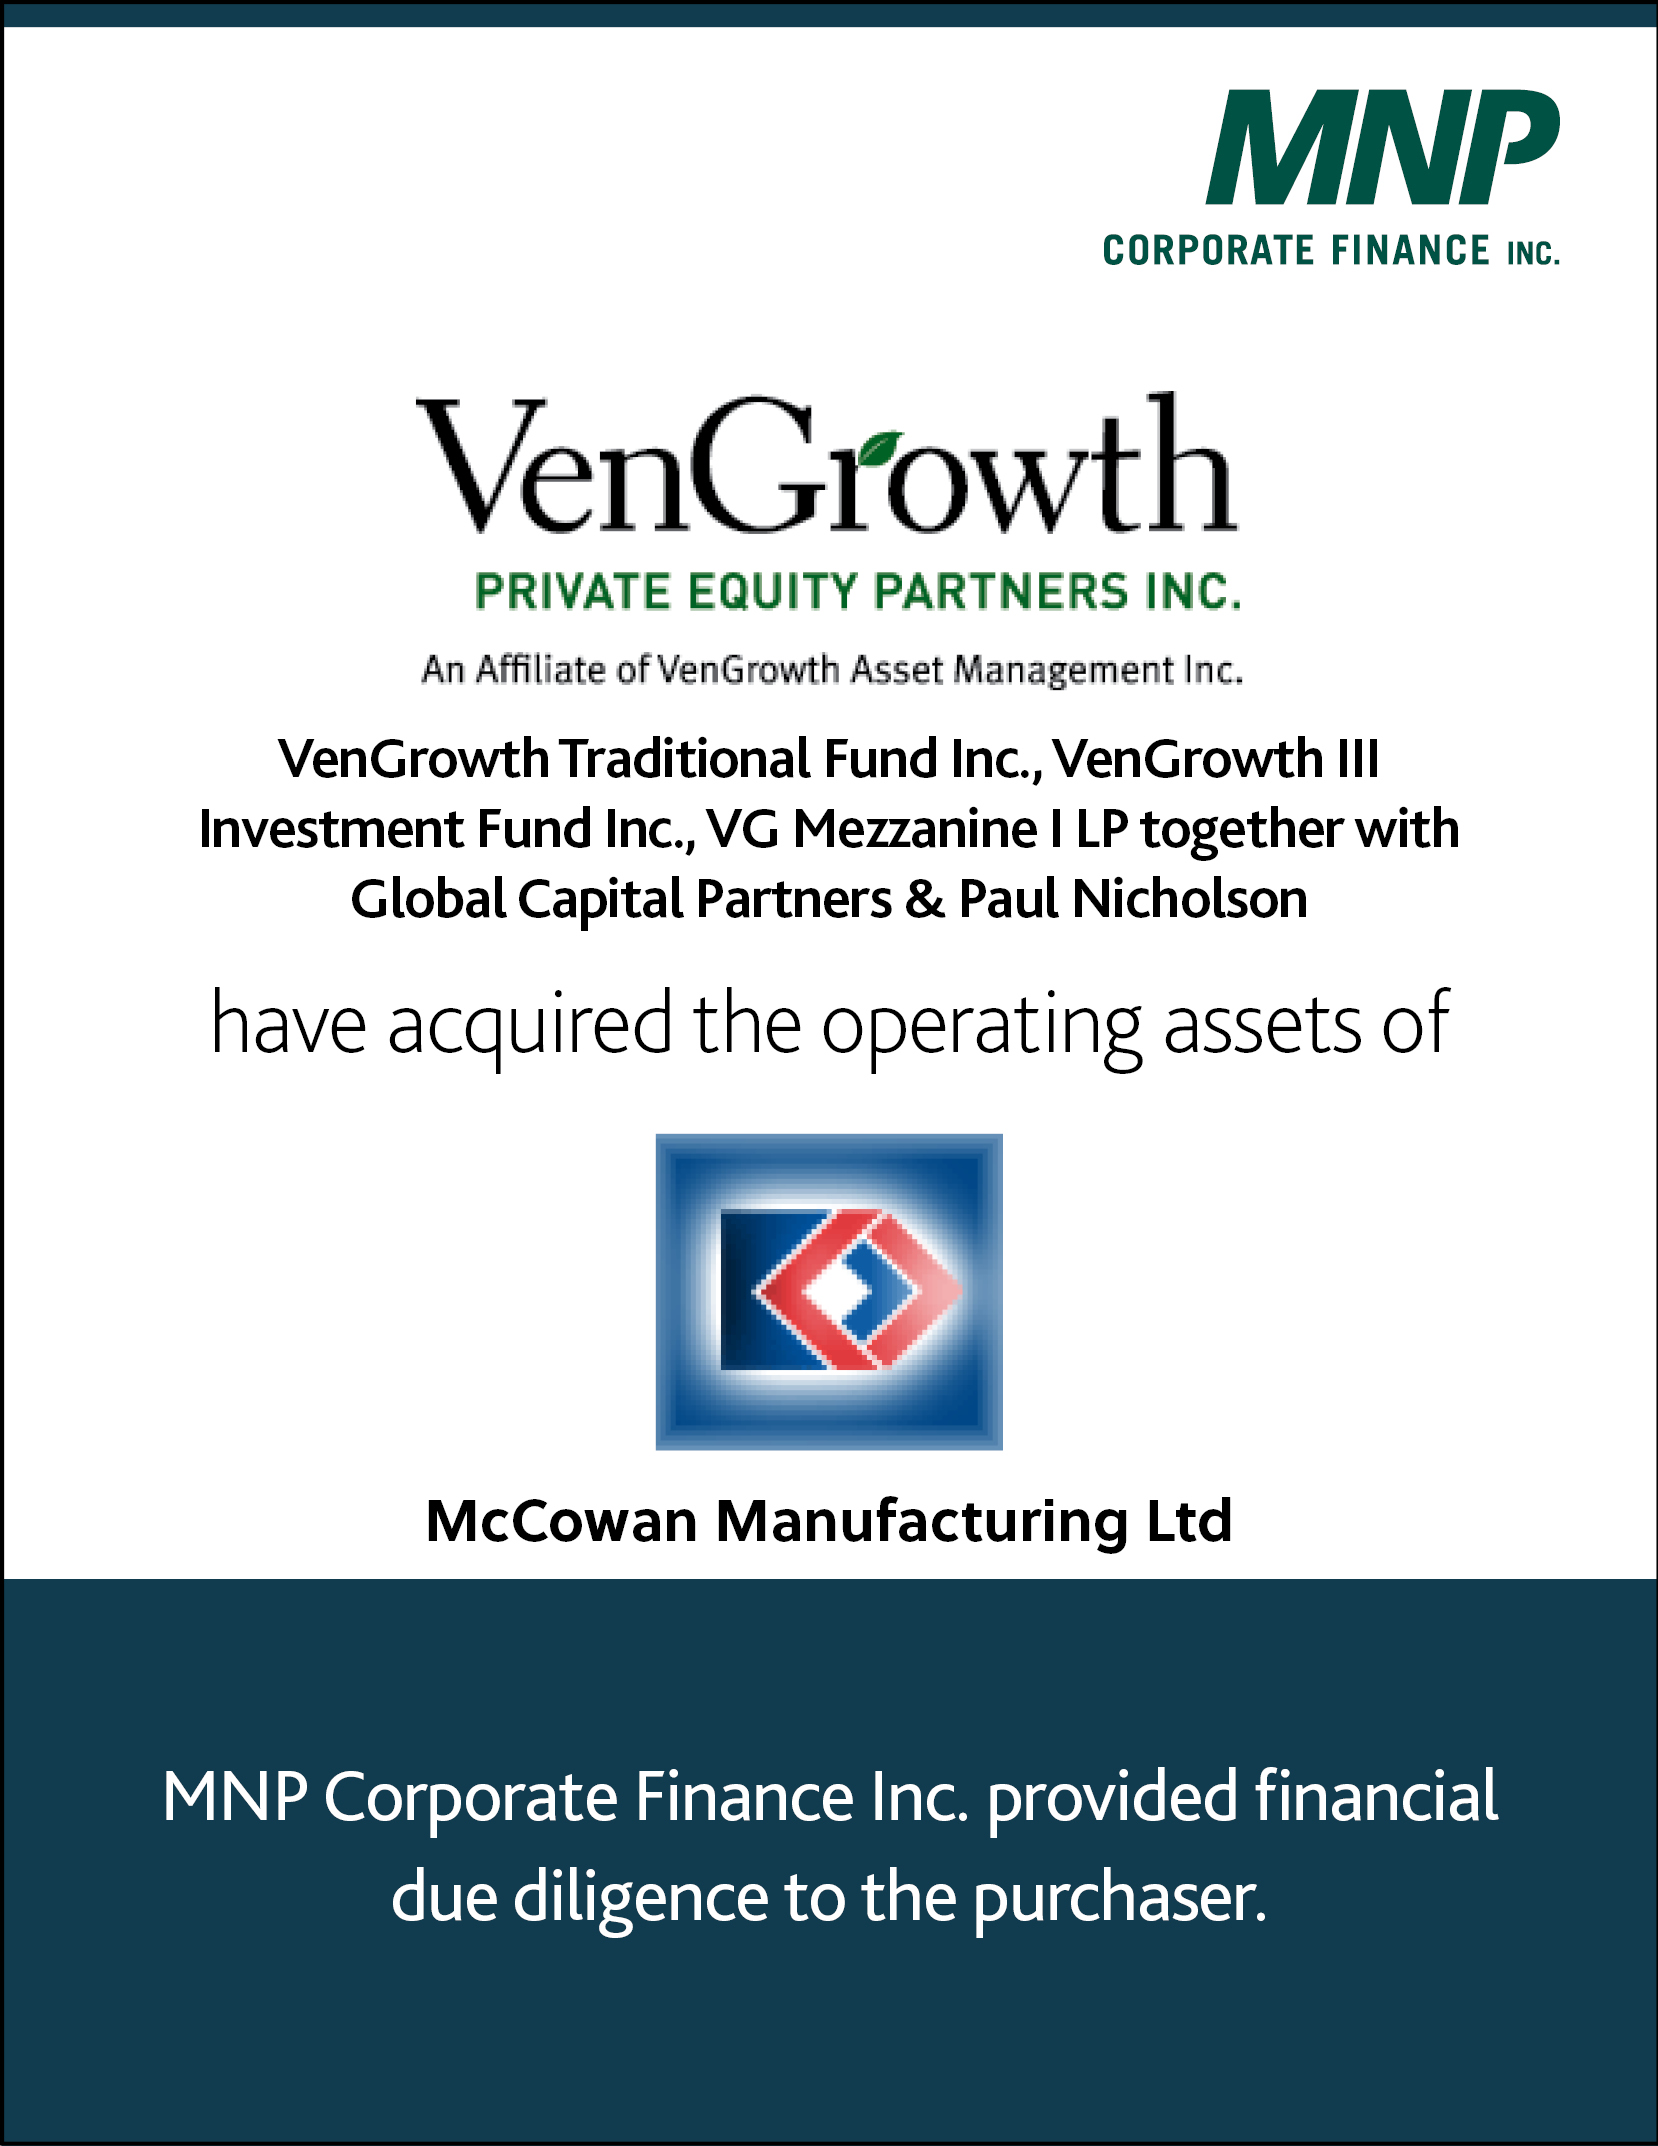 VenGrowth Traditional Fund Inc, VenGrowth III Investment Fund INC., VG Mezzanine I LP together with Global Capital Partners & Paul Nicholson have acquired the operating assets of McCowan Manufacturing Ltd